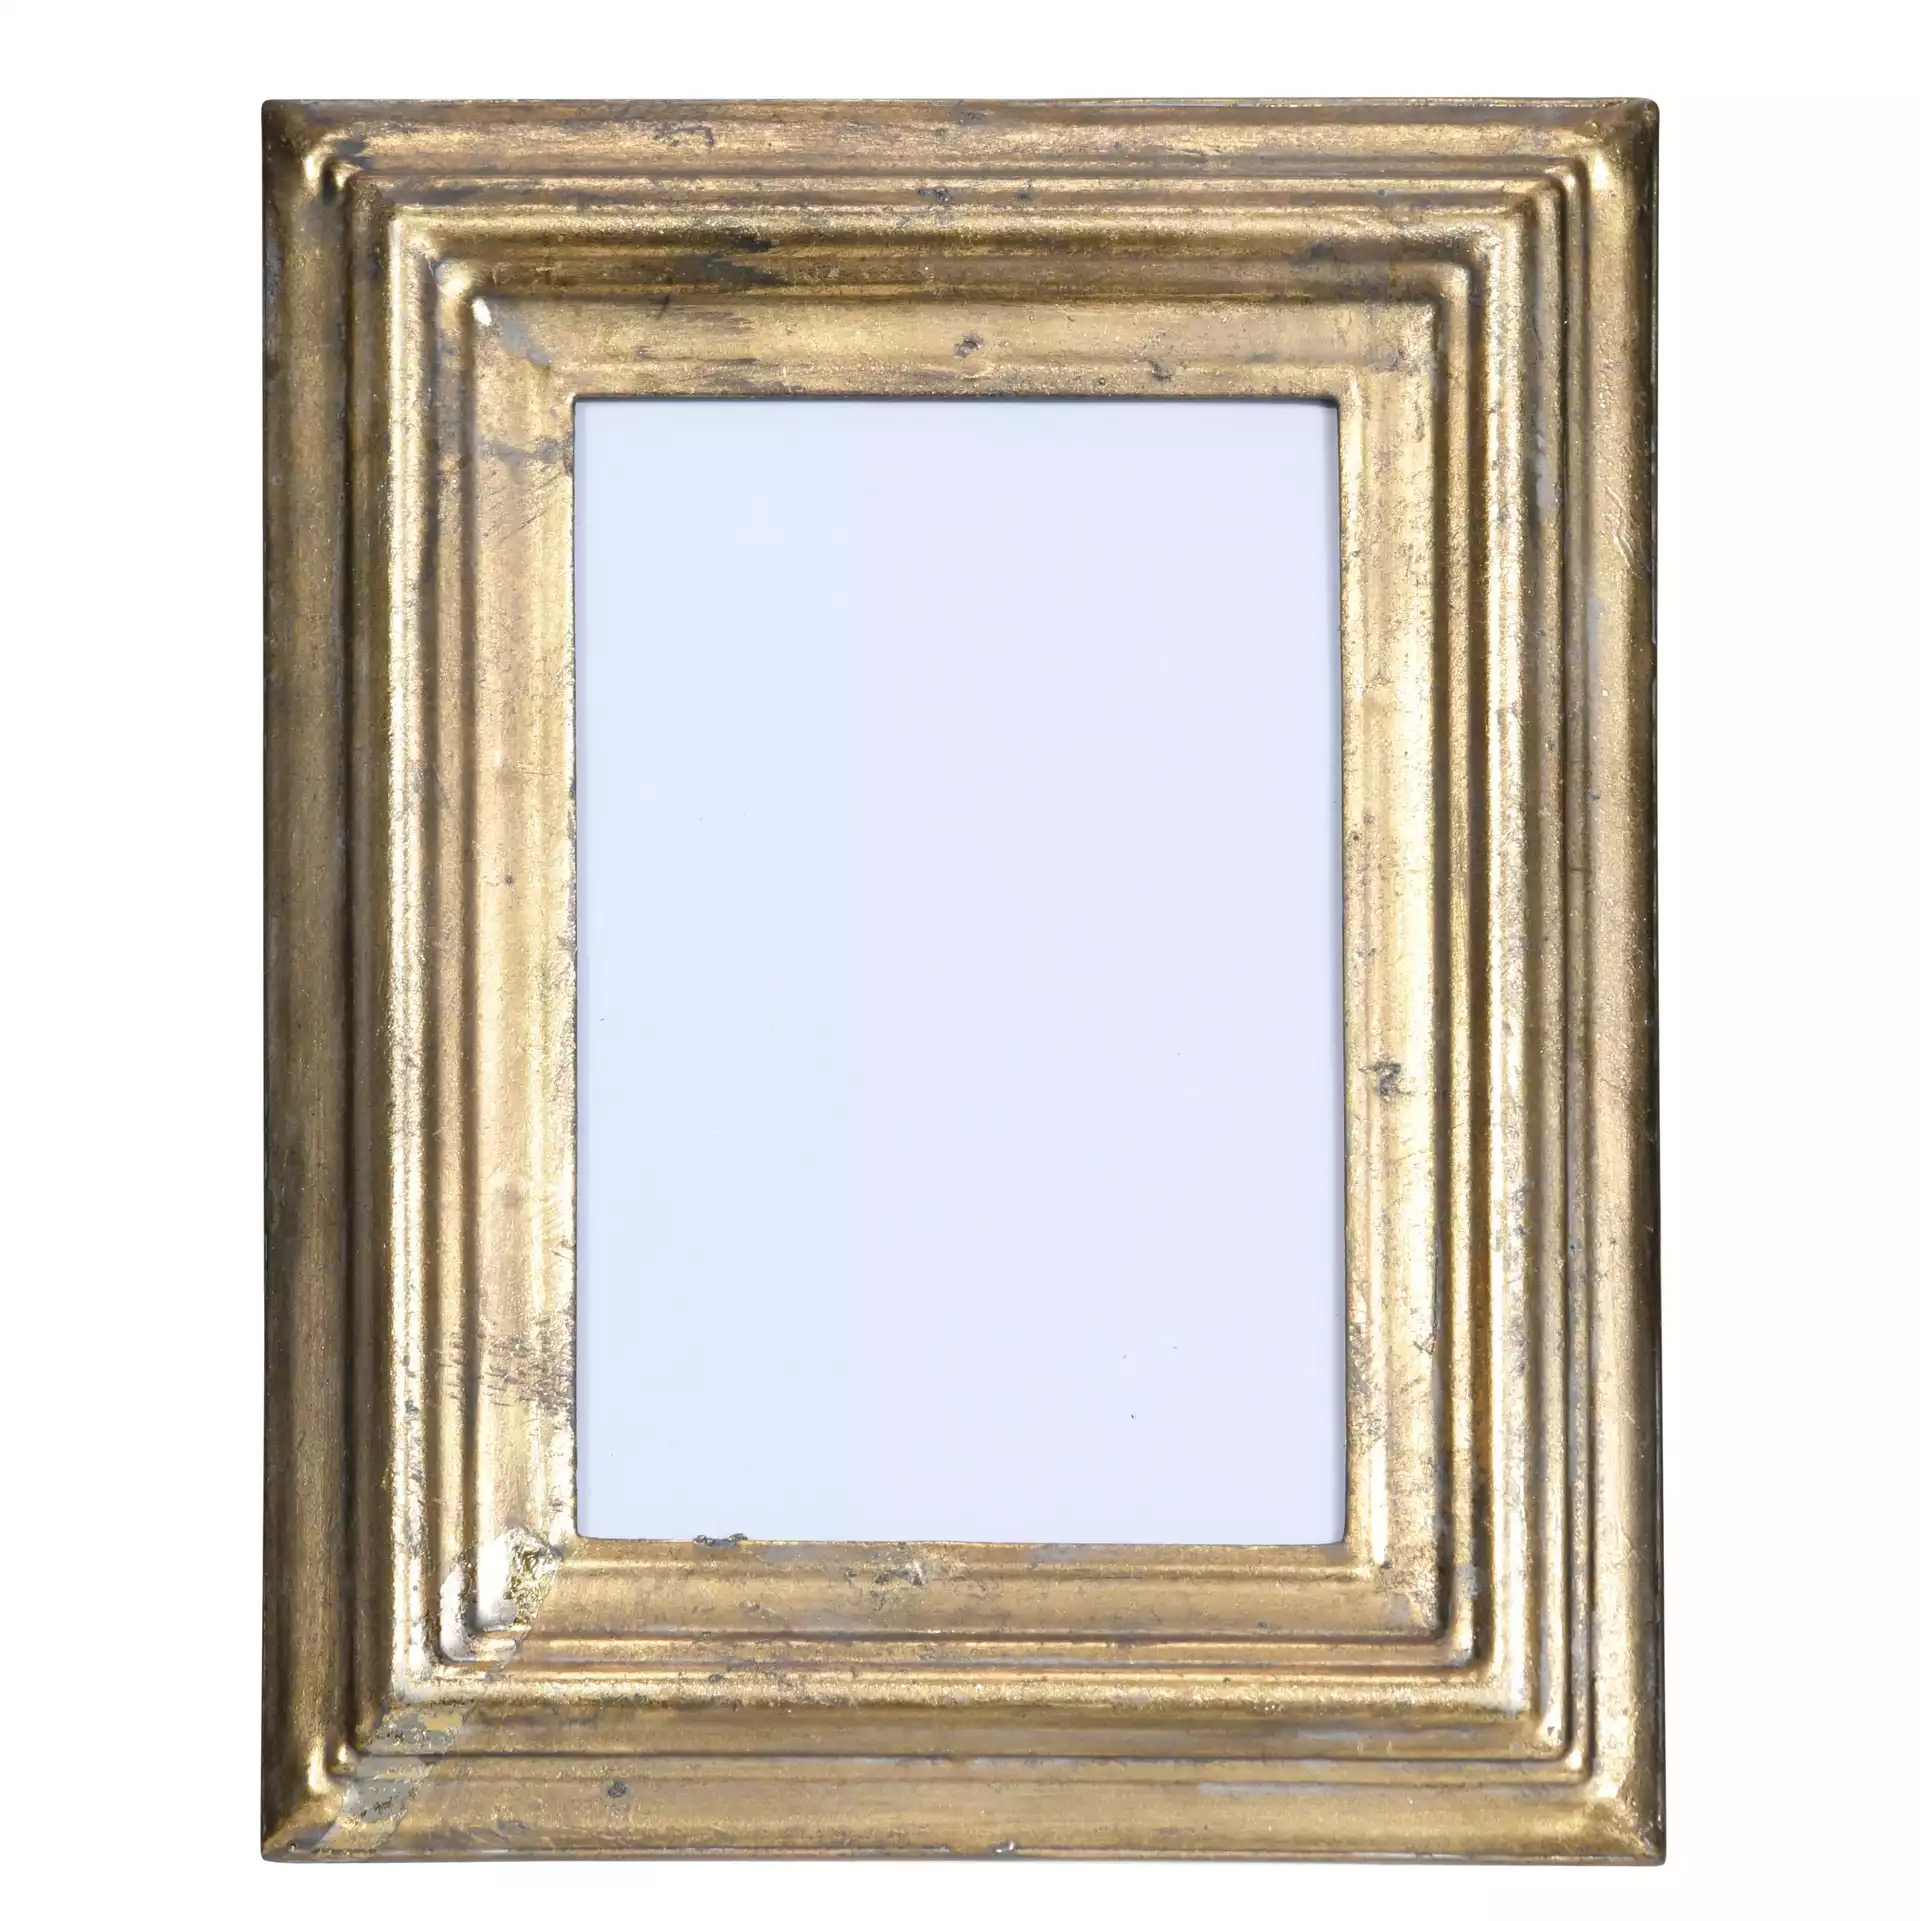 Antiqued Metal Picture Frame, Gold, 4" x 6" Photo